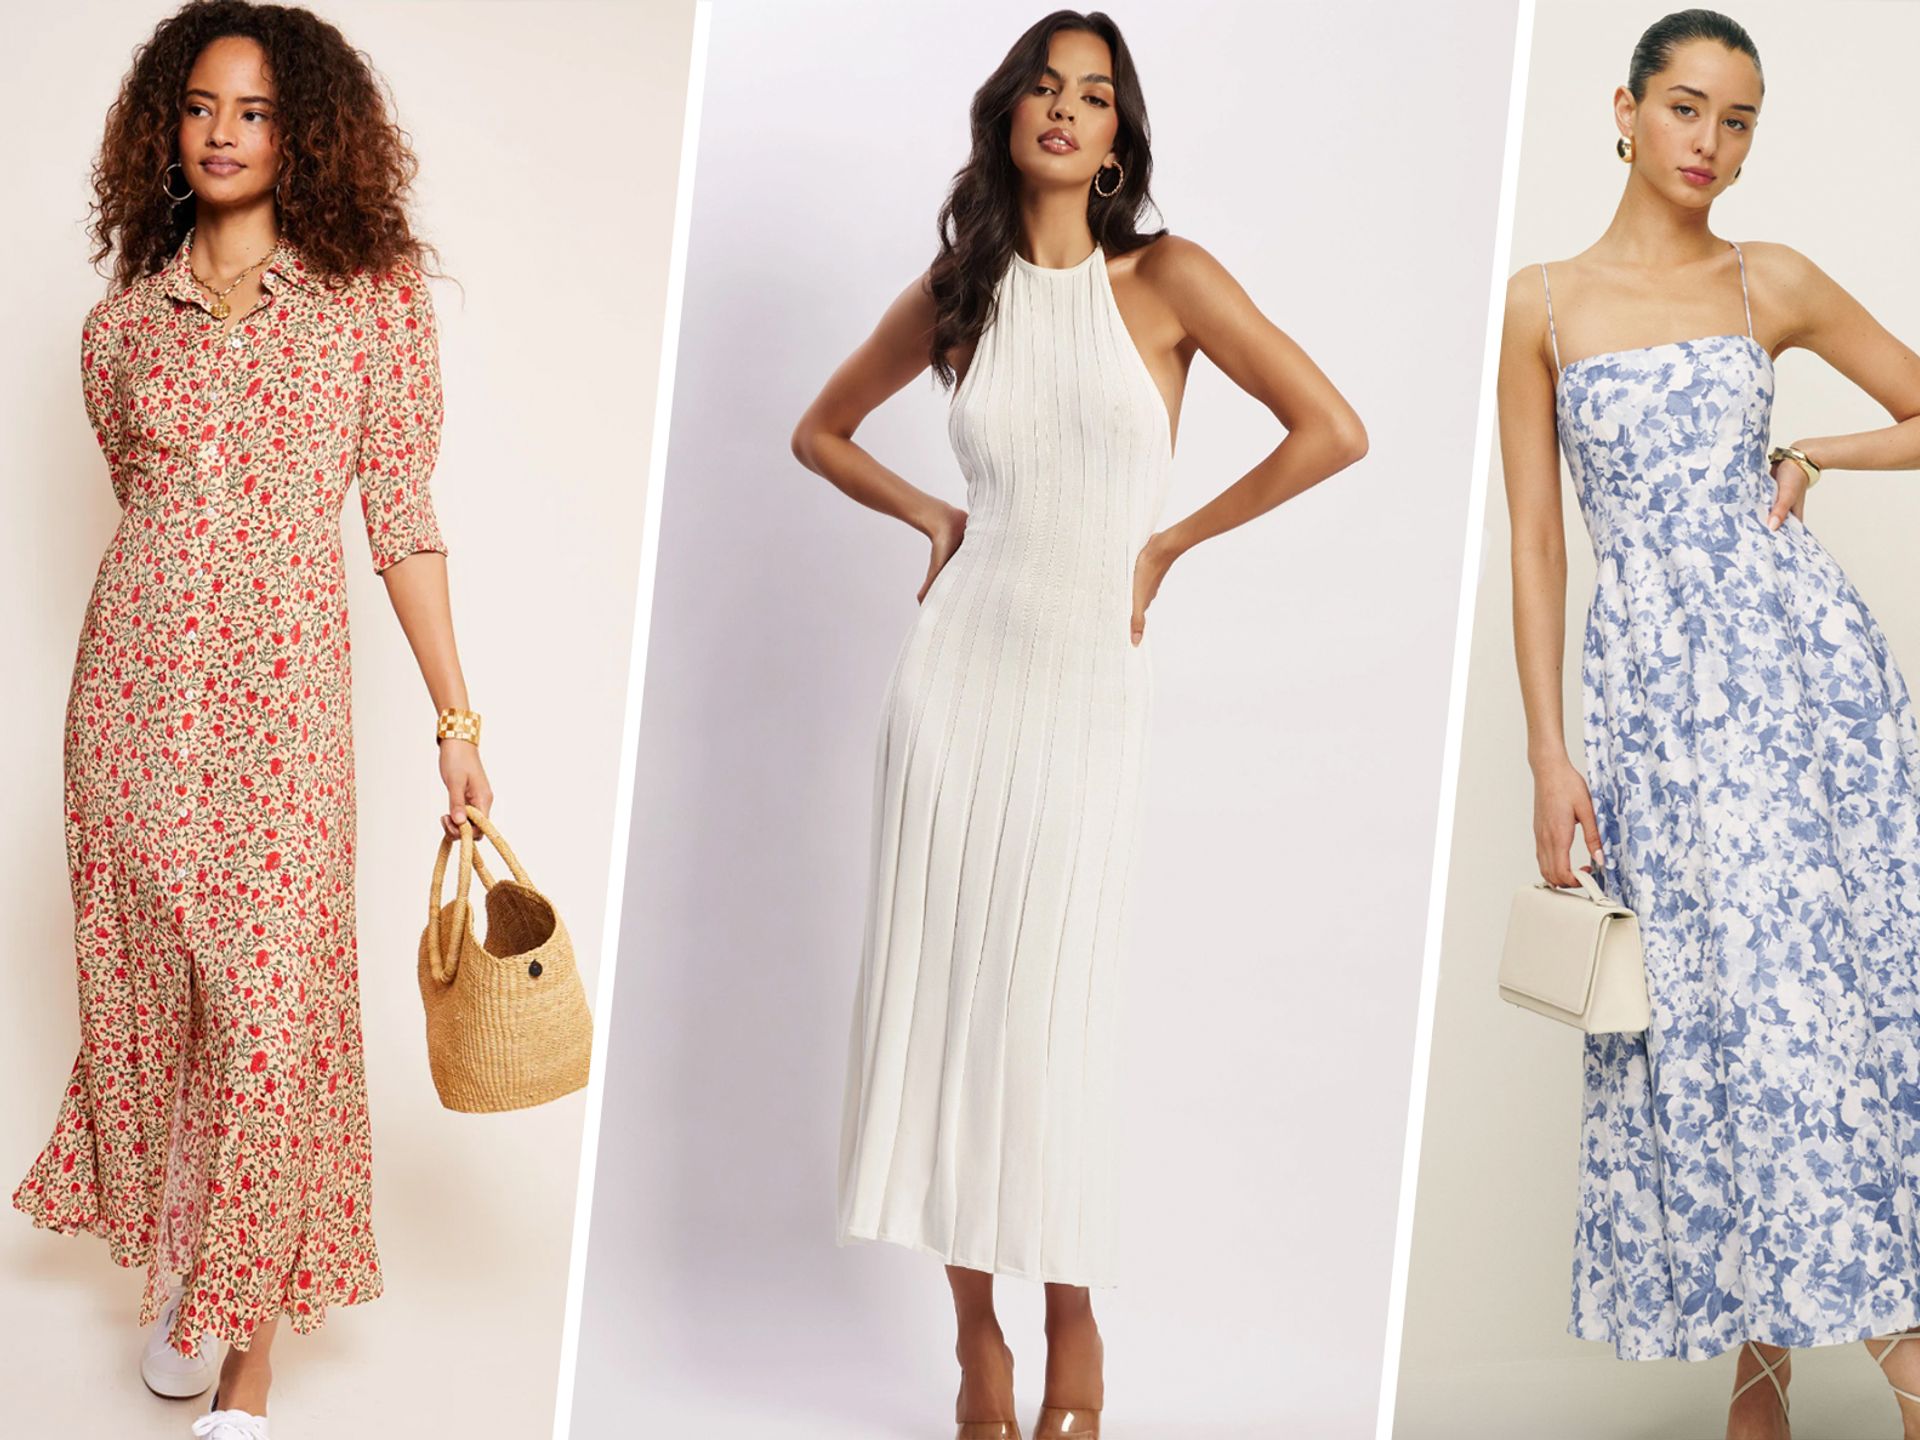 11 midi dresses you'll want to wear this spring: From Zara to M&S